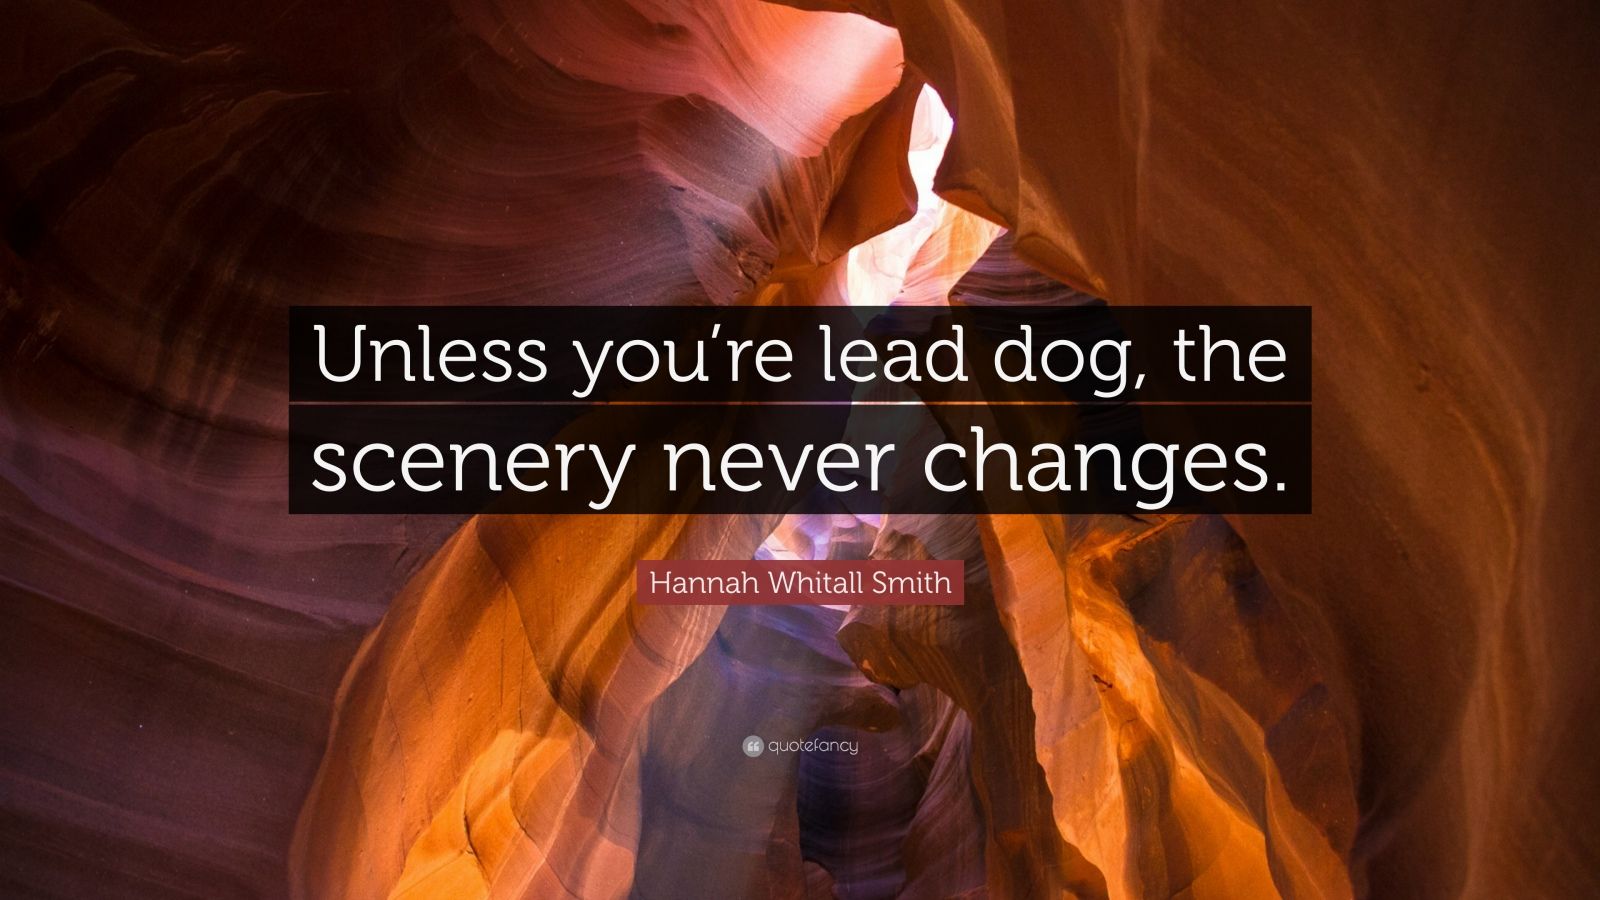 1191891-Hannah-Whitall-Smith-Quote-Unless-you-re-lead-dog-the-scenery.jpg